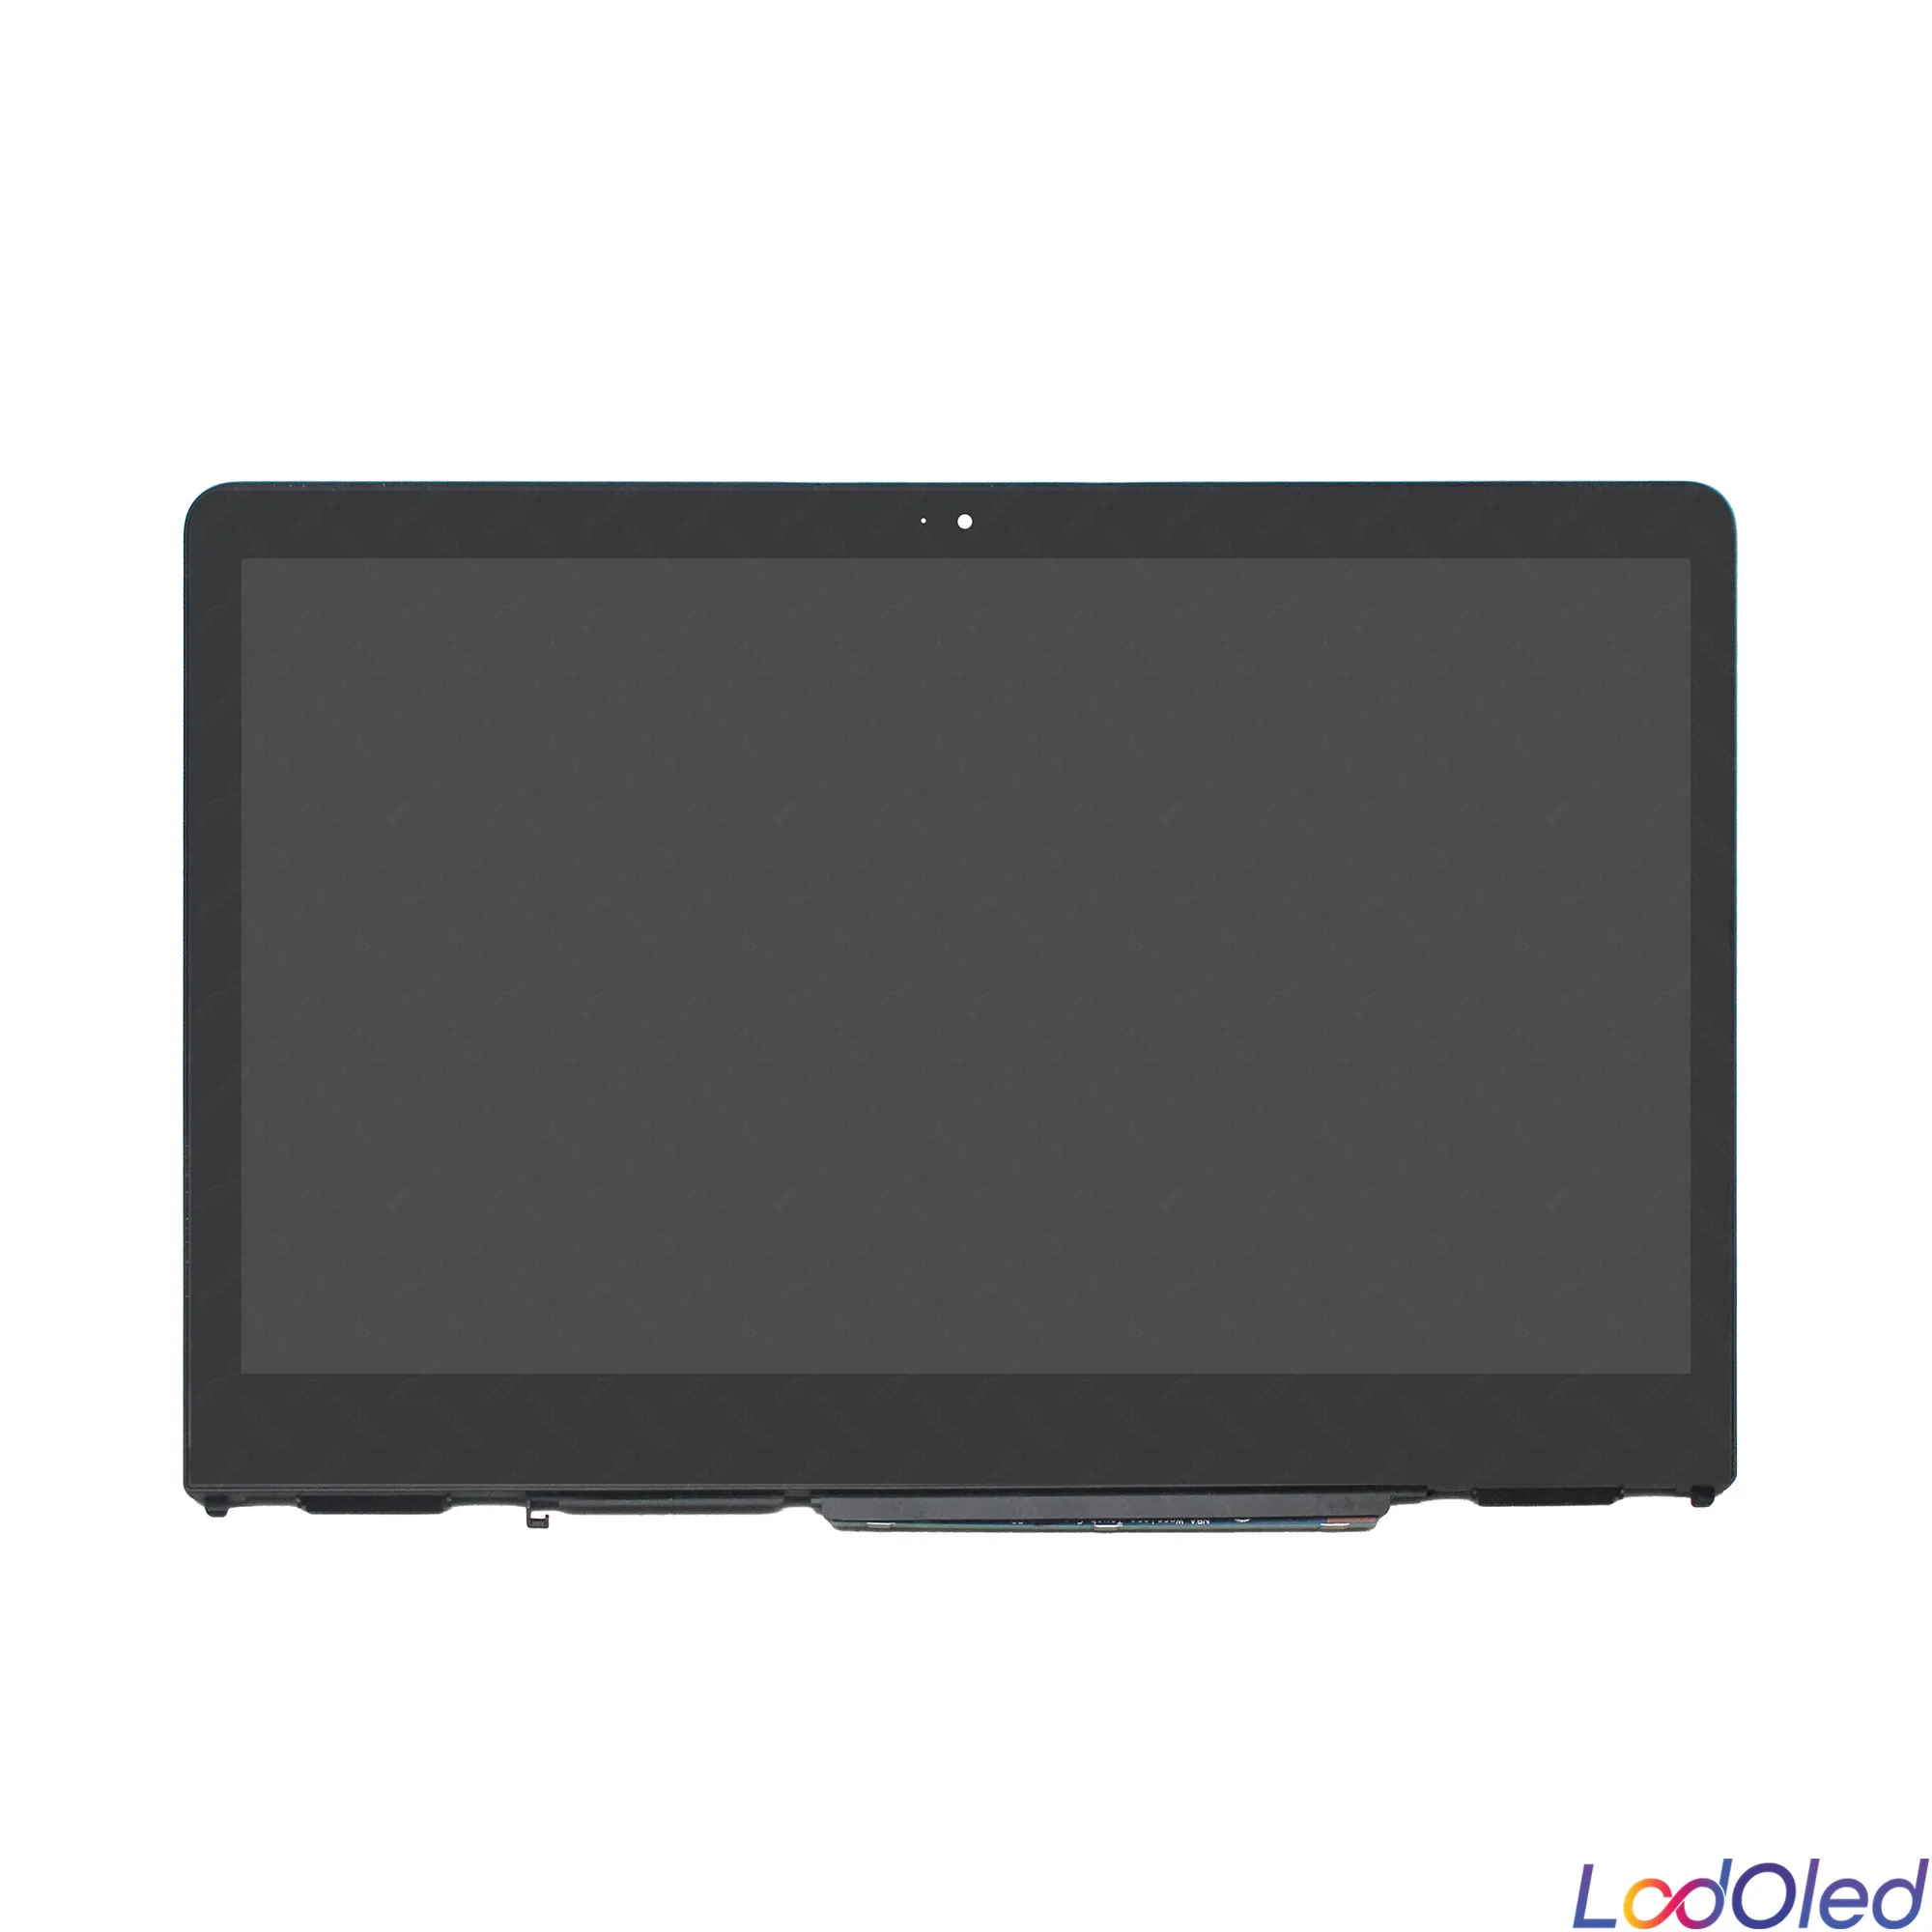 

For HP Pavilion X360 14-ba103tu 14-ba047ur 14-ba026tx 14-ba027tx 14-ba018tu 14-ba005nx LCD Display Touch Screen Glass Assembly